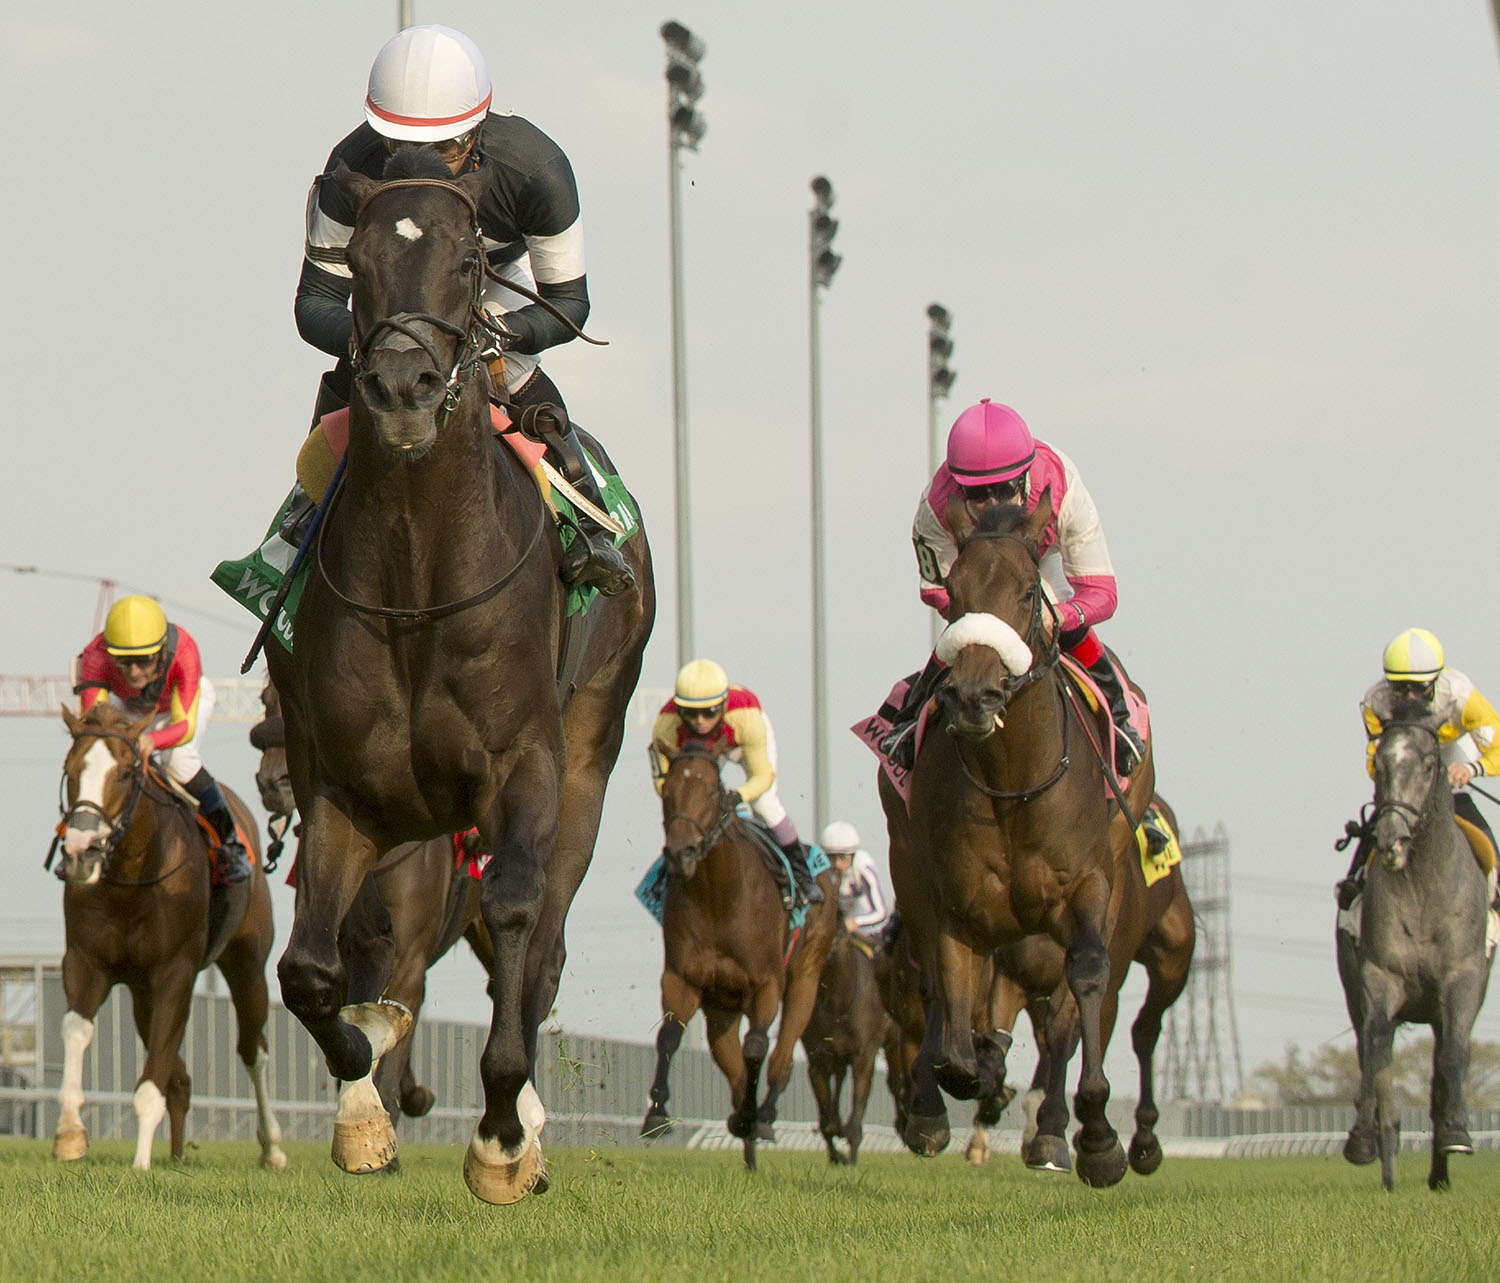 Breeders reaping the rewards of Ontario Sired Reward of Excellence